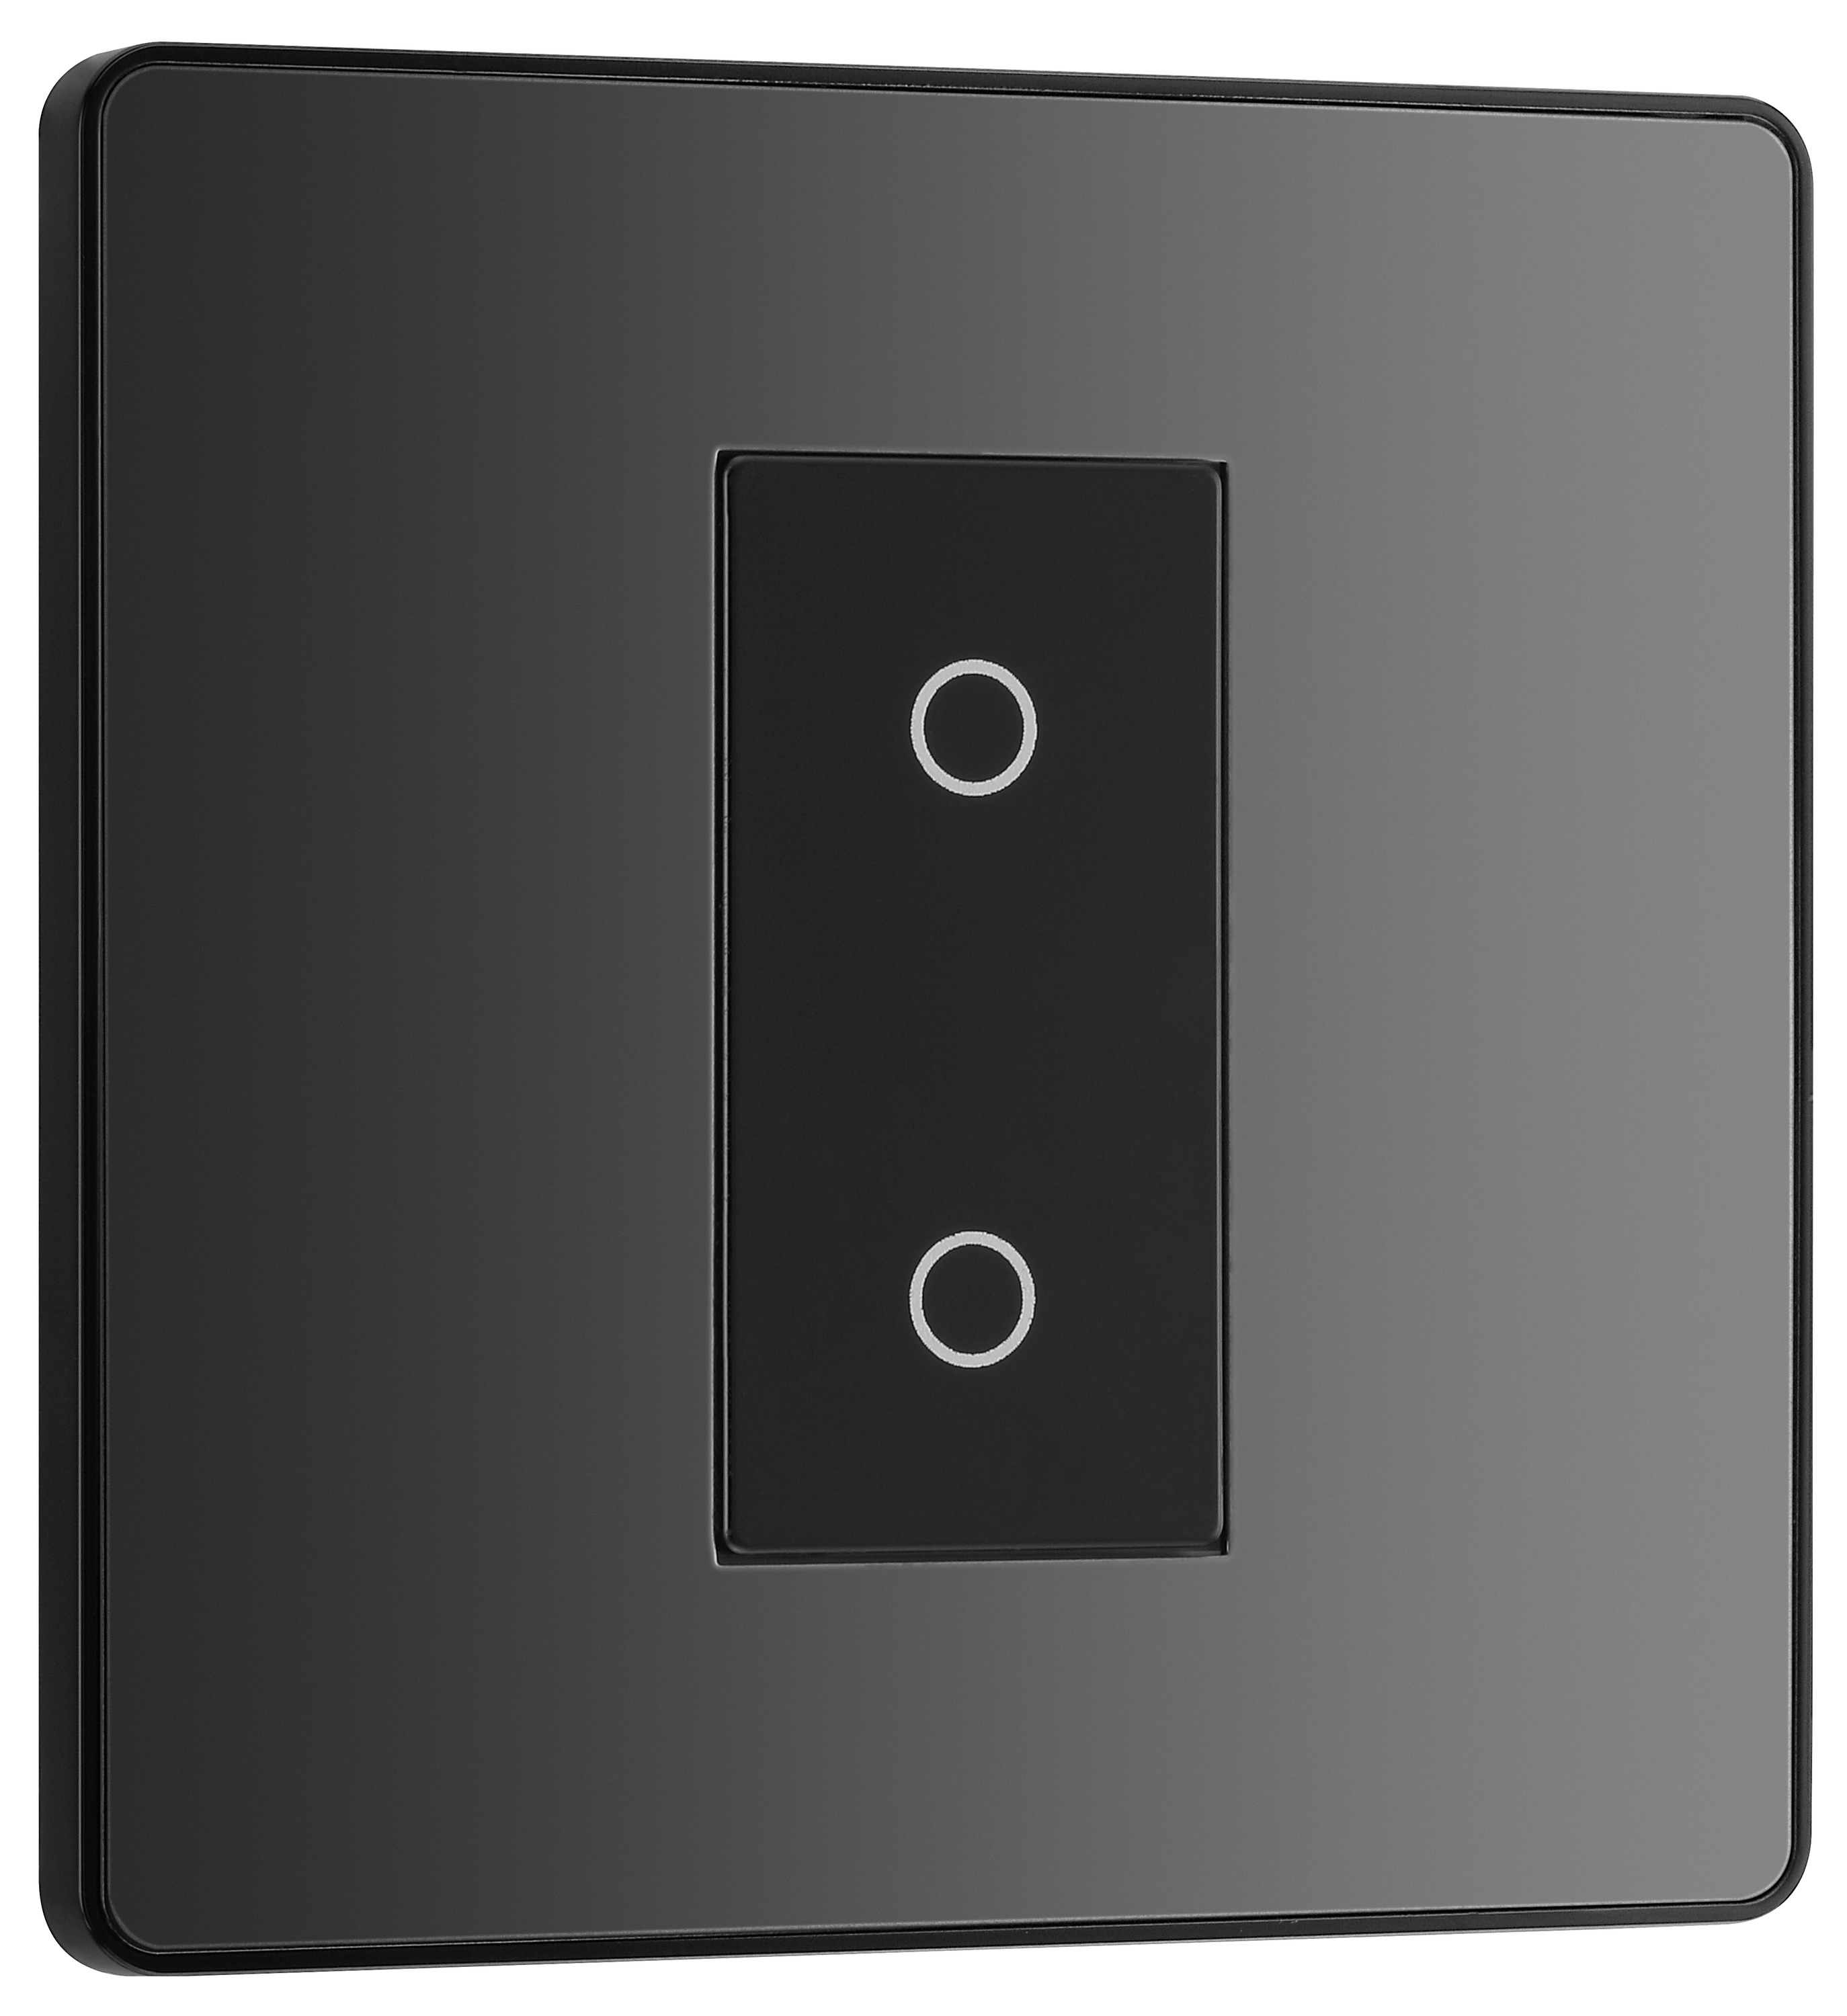 Image of BG Evolve Secondary Black Chrome 2 Way Single Touch Dimmer Switch - 200W